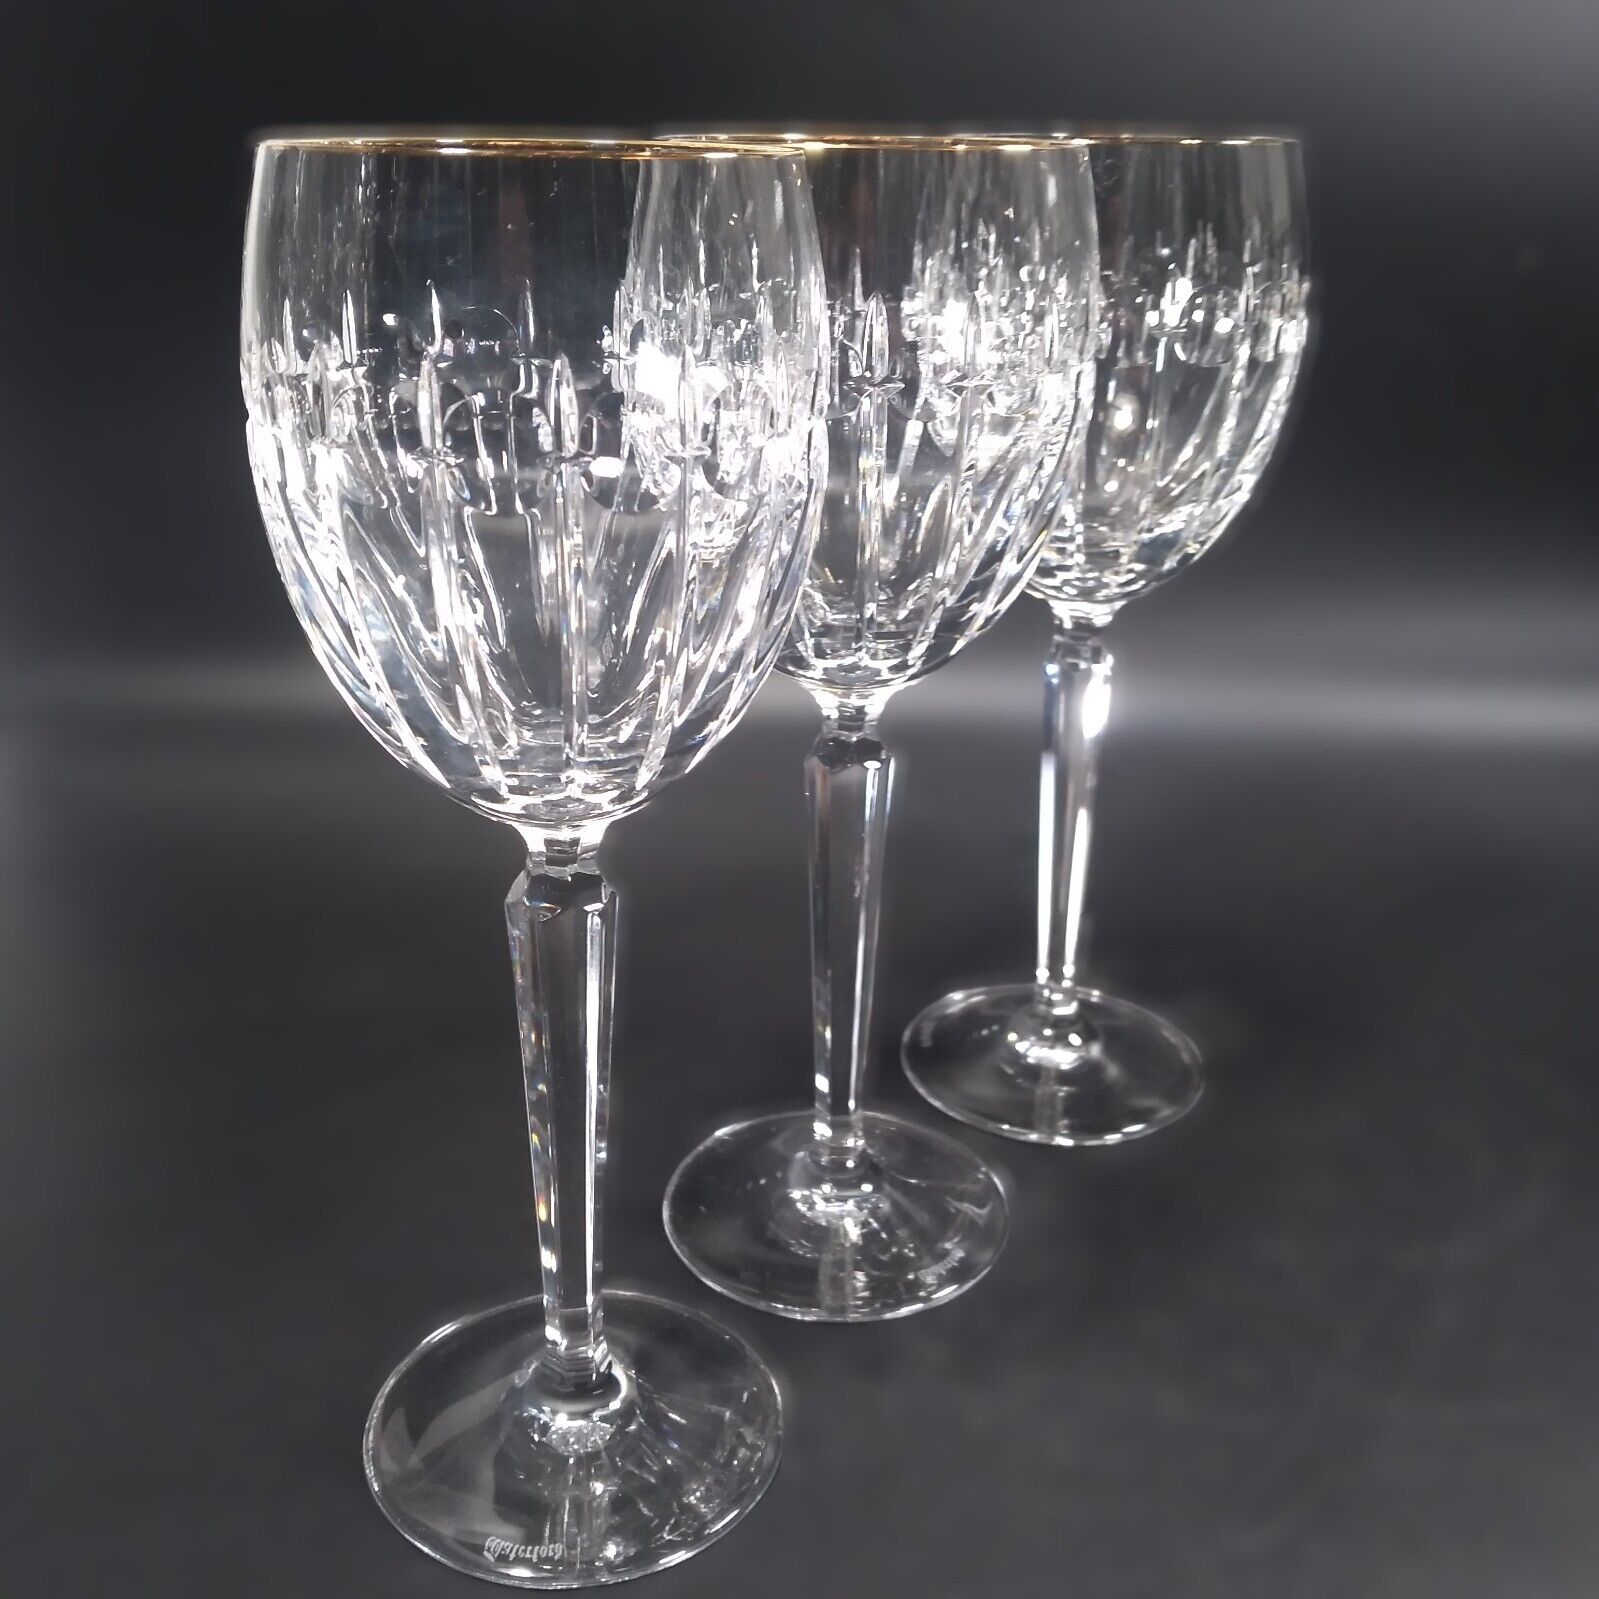 3 WATERFORD Crystal GRENVILLE GOLD Water Goblets Vertical Cuts - Gold Rim Faded